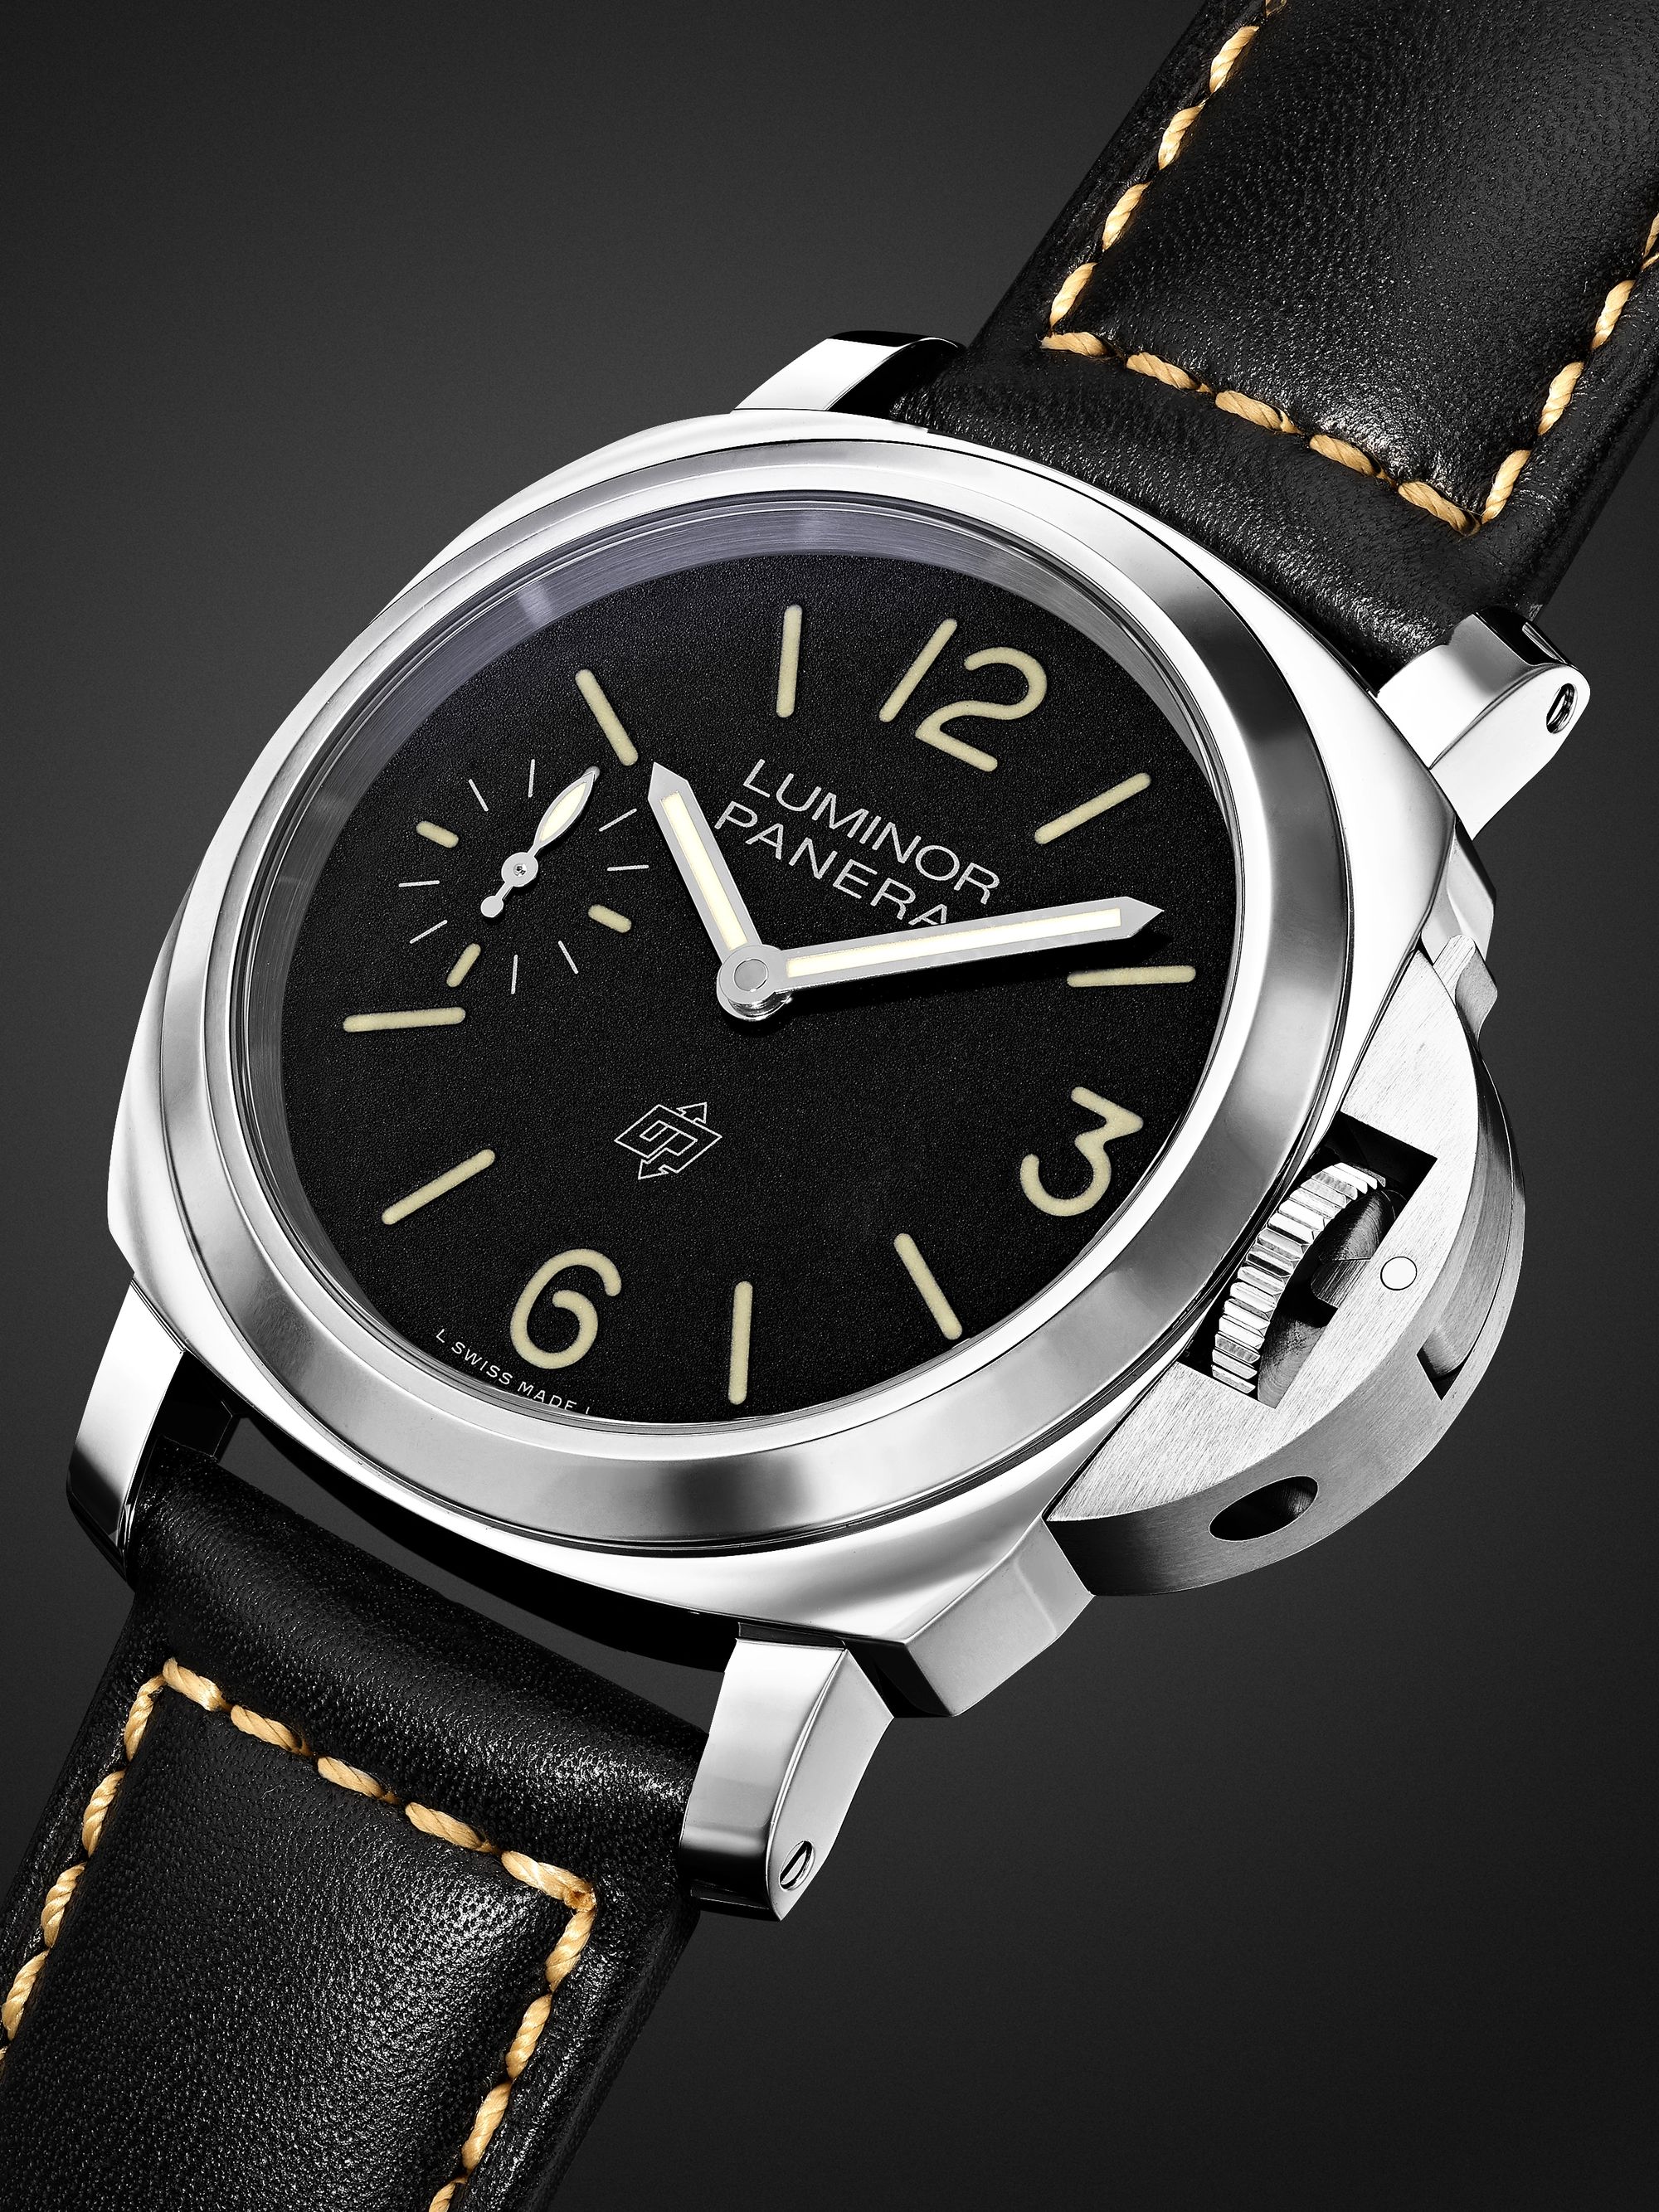 PANERAI Luminor Logo Hand-Wound 44mm Stainless Steel and Leather Watch, Ref. No. PAM01084